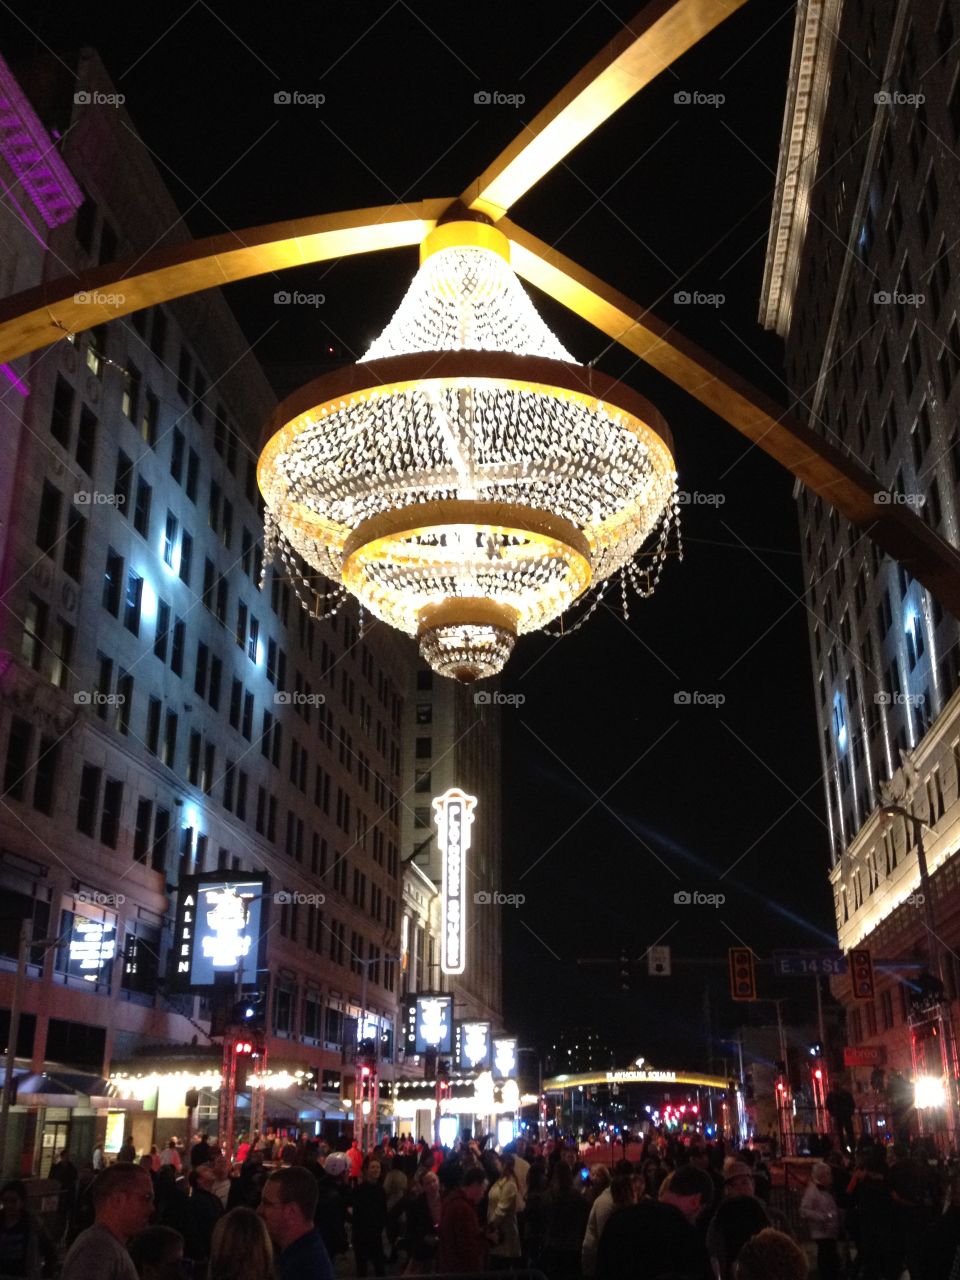 The grand opening of Cleveland's outdoor chandelier above the theater district.